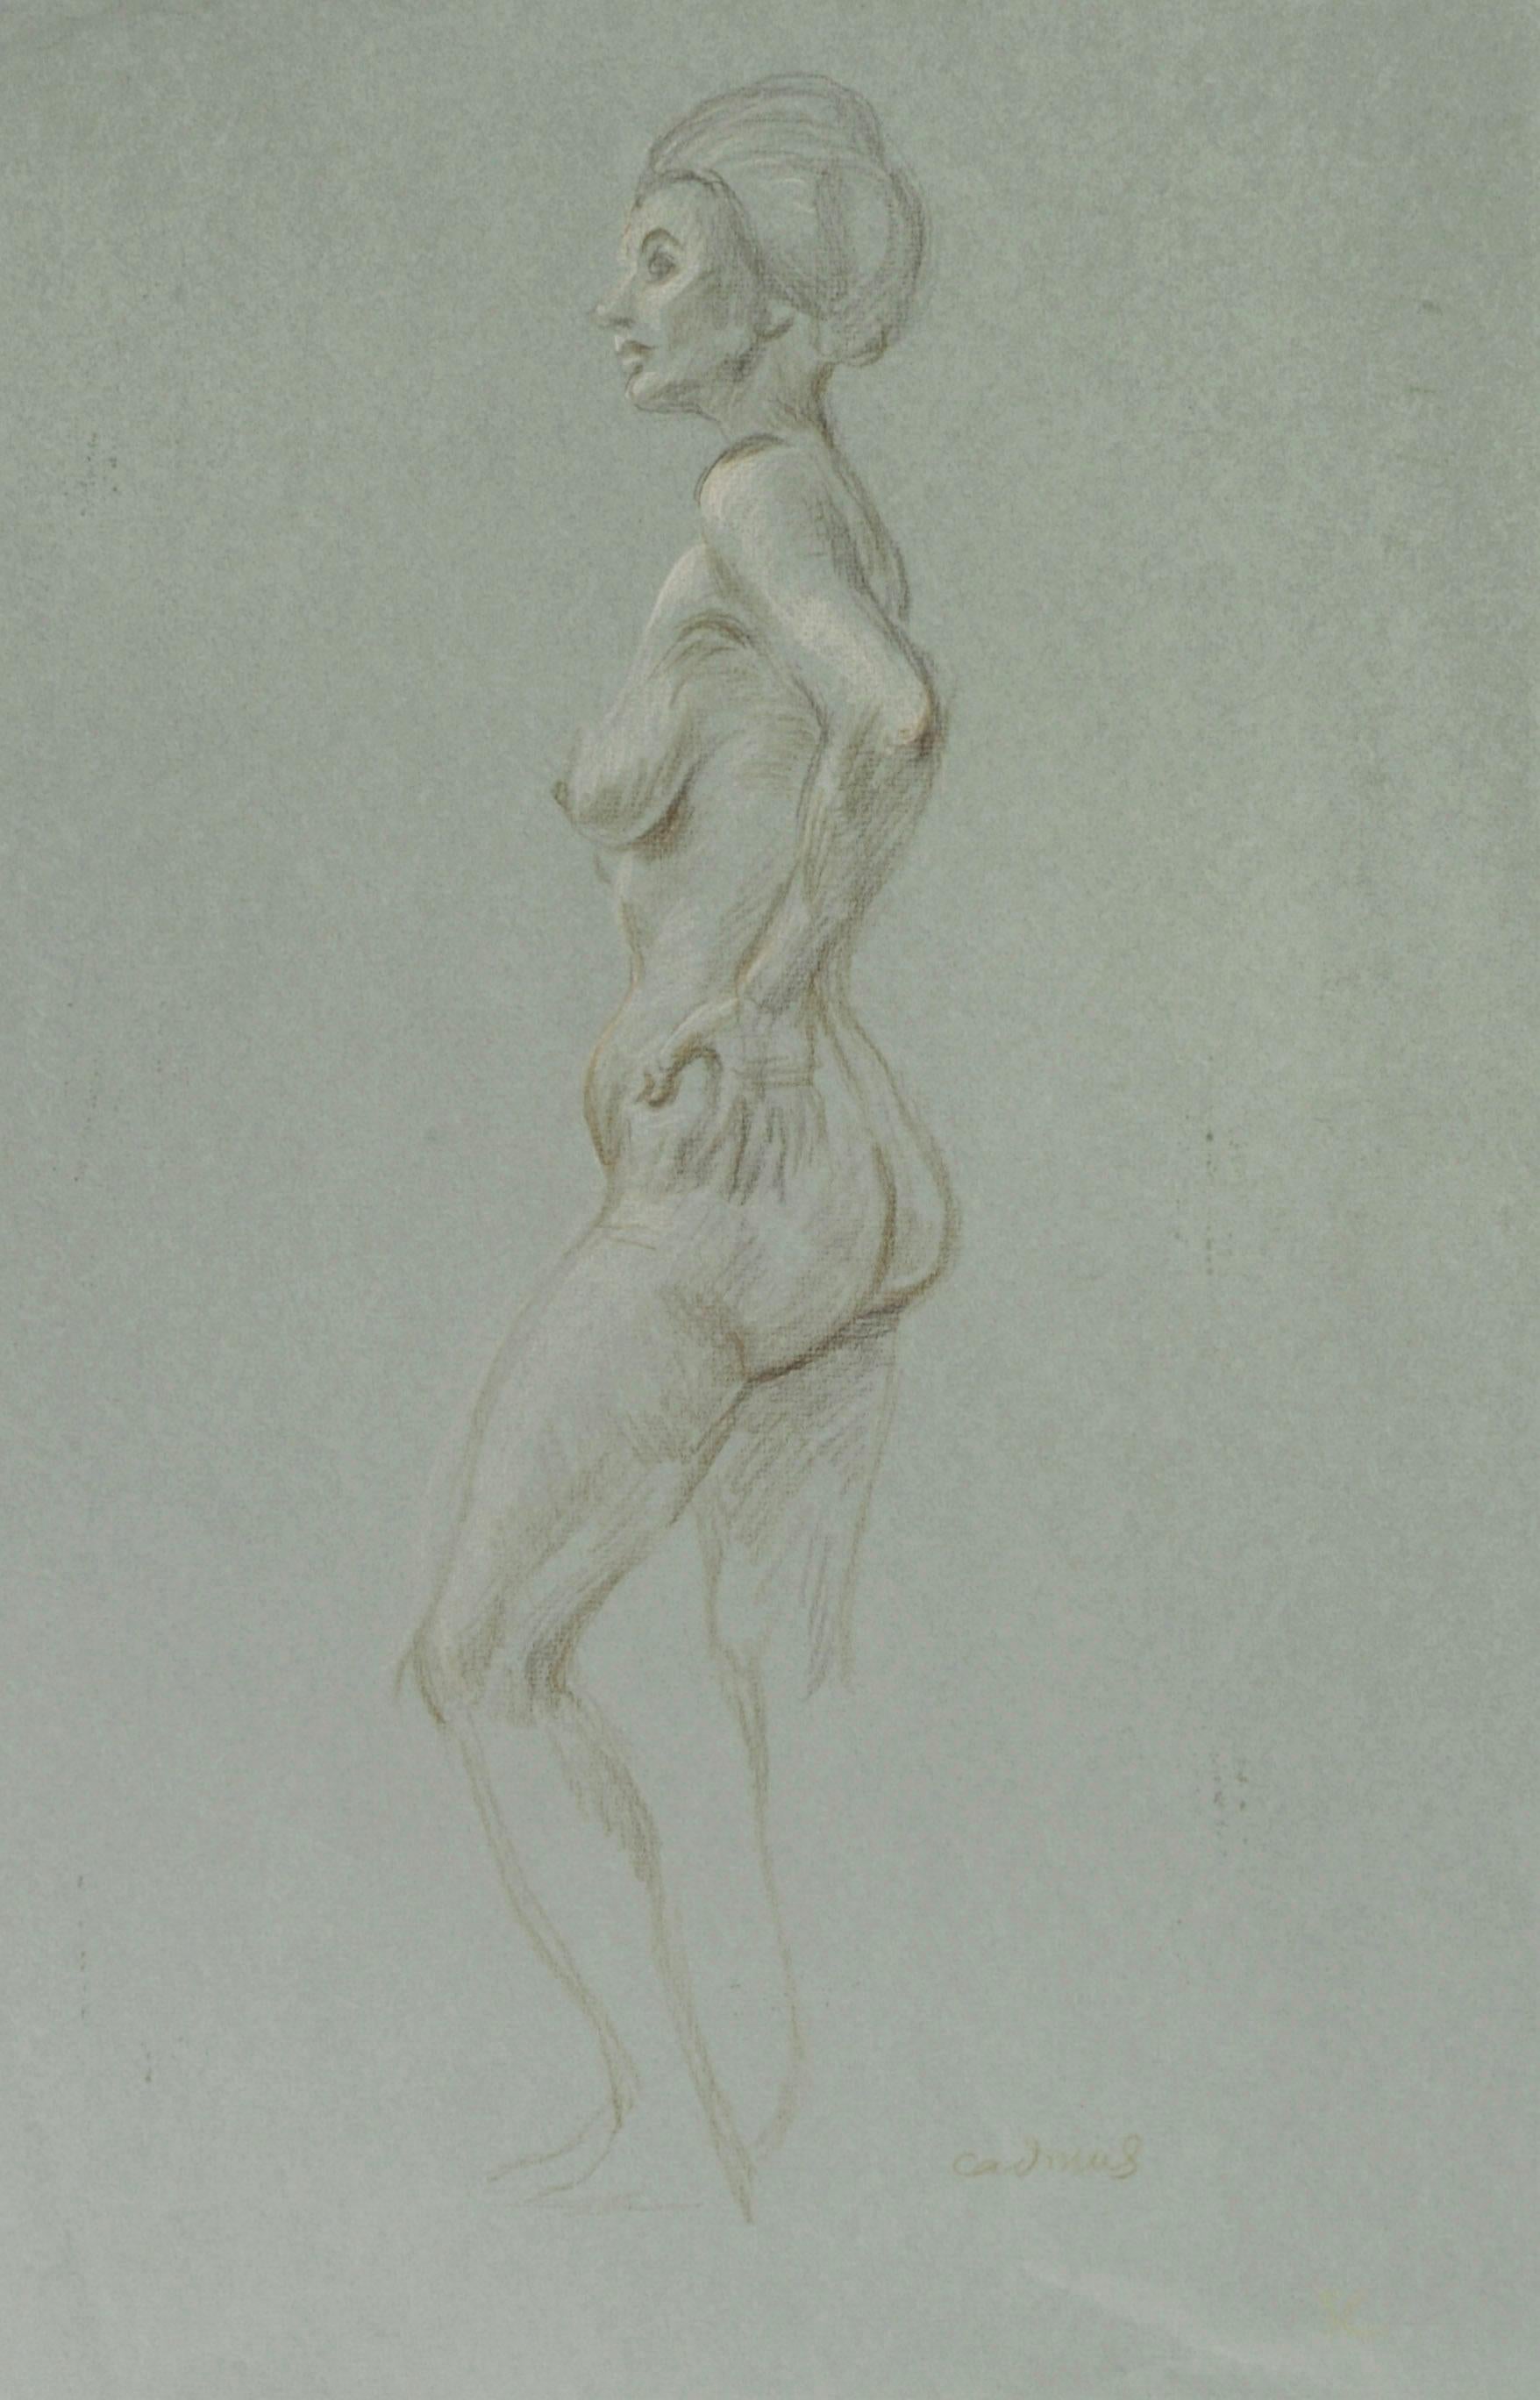 Standing Female Nude in Profile, hand on hip